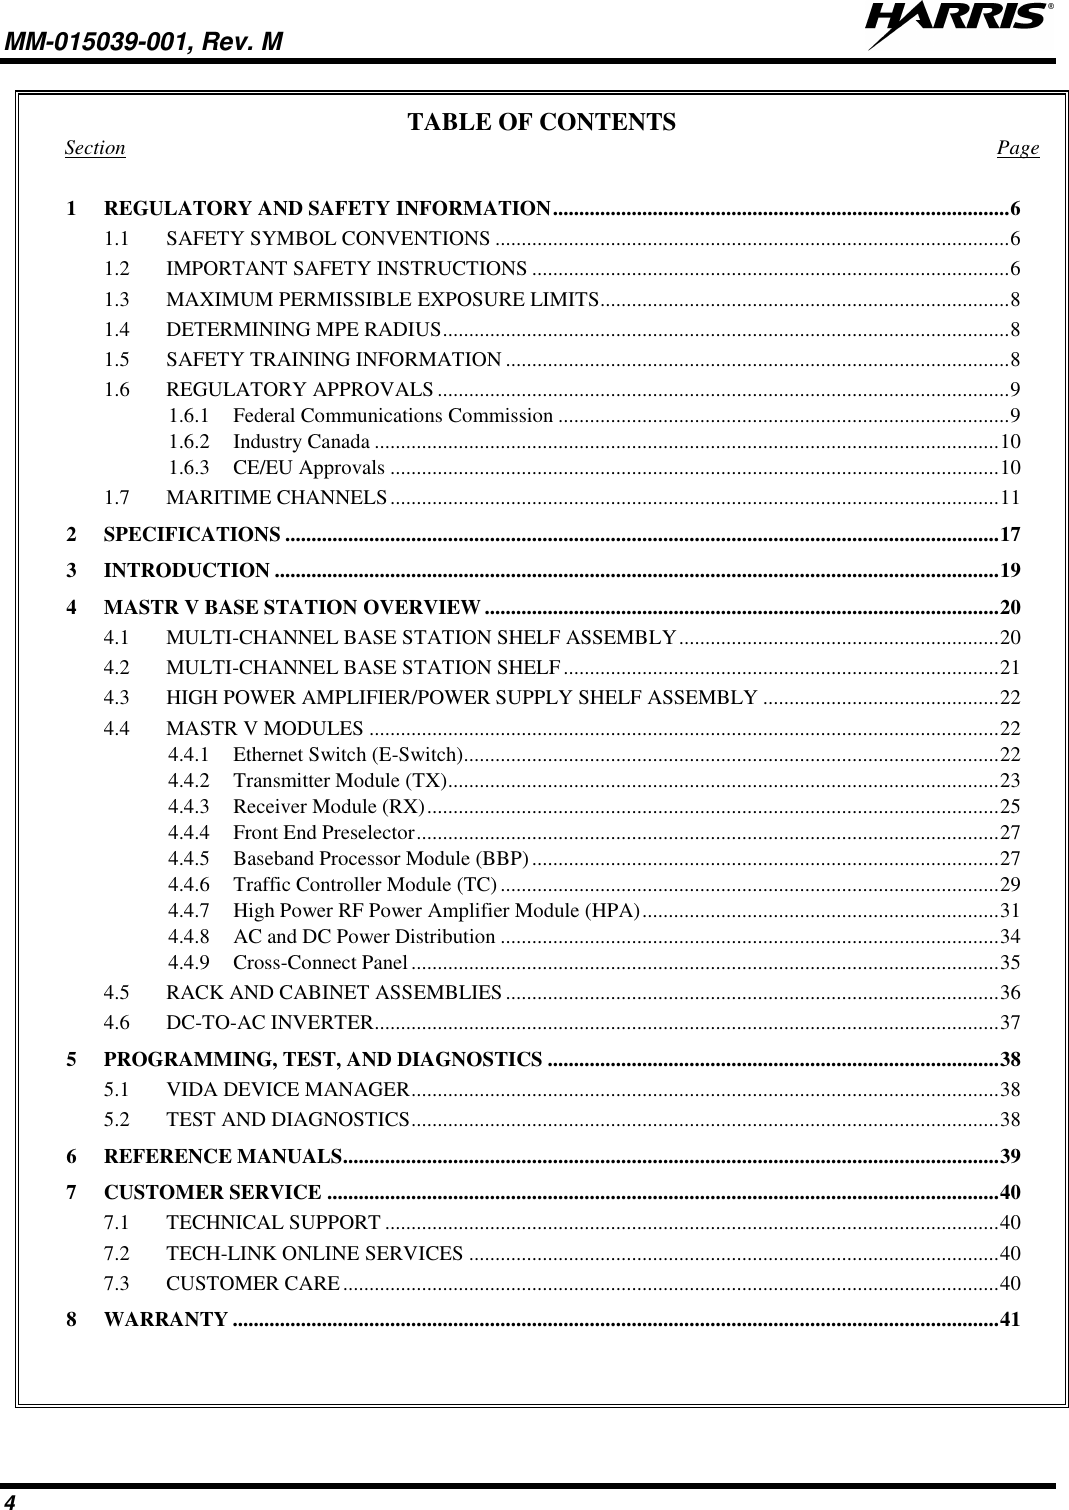 MM-015039-001, Rev. M     4 TABLE OF CONTENTS Section  Page 1 REGULATORY AND SAFETY INFORMATION ....................................................................................... 6 1.1 SAFETY SYMBOL CONVENTIONS .................................................................................................. 6 1.2 IMPORTANT SAFETY INSTRUCTIONS ........................................................................................... 6 1.3 MAXIMUM PERMISSIBLE EXPOSURE LIMITS .............................................................................. 8 1.4 DETERMINING MPE RADIUS ............................................................................................................ 8 1.5 SAFETY TRAINING INFORMATION ................................................................................................ 8 1.6 REGULATORY APPROVALS ............................................................................................................. 9 1.6.1 Federal Communications Commission ...................................................................................... 9 1.6.2 Industry Canada ....................................................................................................................... 10 1.6.3 CE/EU Approvals .................................................................................................................... 10 1.7 MARITIME CHANNELS .................................................................................................................... 11 2 SPECIFICATIONS ........................................................................................................................................ 17 3 INTRODUCTION .......................................................................................................................................... 19 4 MASTR V BASE STATION OVERVIEW .................................................................................................. 20 4.1 MULTI-CHANNEL BASE STATION SHELF ASSEMBLY ............................................................. 20 4.2 MULTI-CHANNEL BASE STATION SHELF ................................................................................... 21 4.3 HIGH POWER AMPLIFIER/POWER SUPPLY SHELF ASSEMBLY ............................................. 22 4.4 MASTR V MODULES ........................................................................................................................ 22 4.4.1 Ethernet Switch (E-Switch)...................................................................................................... 22 4.4.2 Transmitter Module (TX) ......................................................................................................... 23 4.4.3 Receiver Module (RX) ............................................................................................................. 25 4.4.4 Front End Preselector ............................................................................................................... 27 4.4.5 Baseband Processor Module (BBP) ......................................................................................... 27 4.4.6 Traffic Controller Module (TC) ............................................................................................... 29 4.4.7 High Power RF Power Amplifier Module (HPA) .................................................................... 31 4.4.8 AC and DC Power Distribution ............................................................................................... 34 4.4.9 Cross-Connect Panel ................................................................................................................ 35 4.5 RACK AND CABINET ASSEMBLIES .............................................................................................. 36 4.6 DC-TO-AC INVERTER ....................................................................................................................... 37 5 PROGRAMMING, TEST, AND DIAGNOSTICS ...................................................................................... 38 5.1 VIDA DEVICE MANAGER ................................................................................................................ 38 5.2 TEST AND DIAGNOSTICS ................................................................................................................ 38 6 REFERENCE MANUALS............................................................................................................................. 39 7 CUSTOMER SERVICE ................................................................................................................................ 40 7.1 TECHNICAL SUPPORT ..................................................................................................................... 40 7.2 TECH-LINK ONLINE SERVICES ..................................................................................................... 40 7.3 CUSTOMER CARE ............................................................................................................................. 40 8 WARRANTY .................................................................................................................................................. 41   